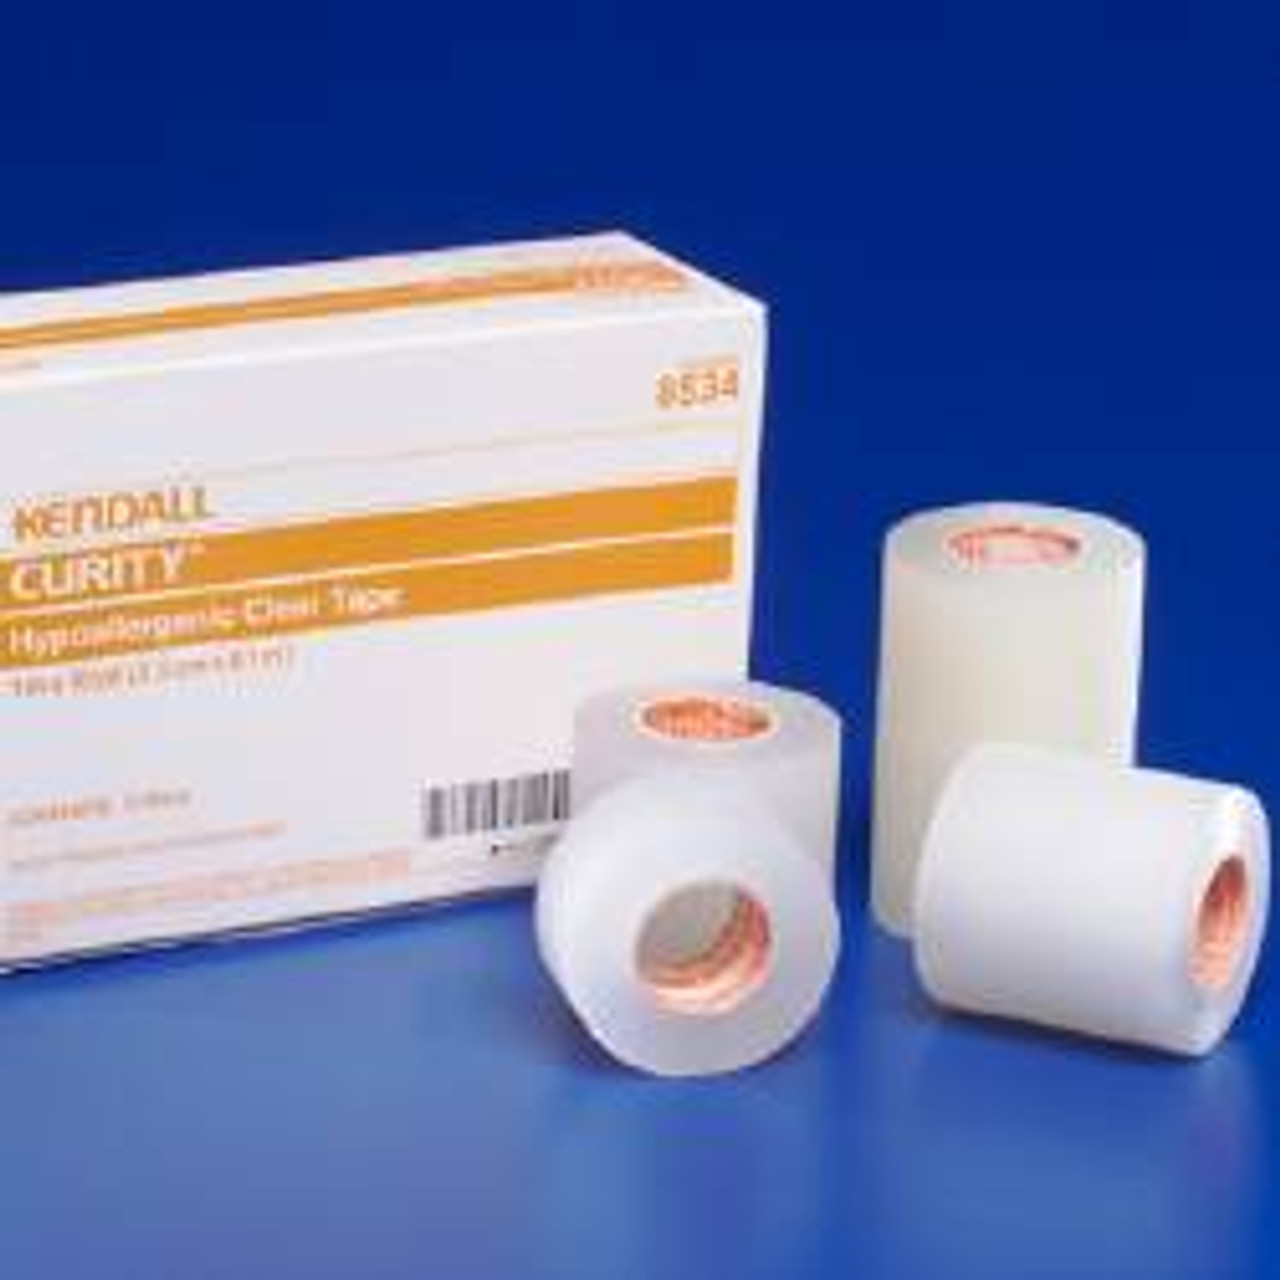 Kendall Hypoallergenic Medical Tape, 2 inch x 10 Yard